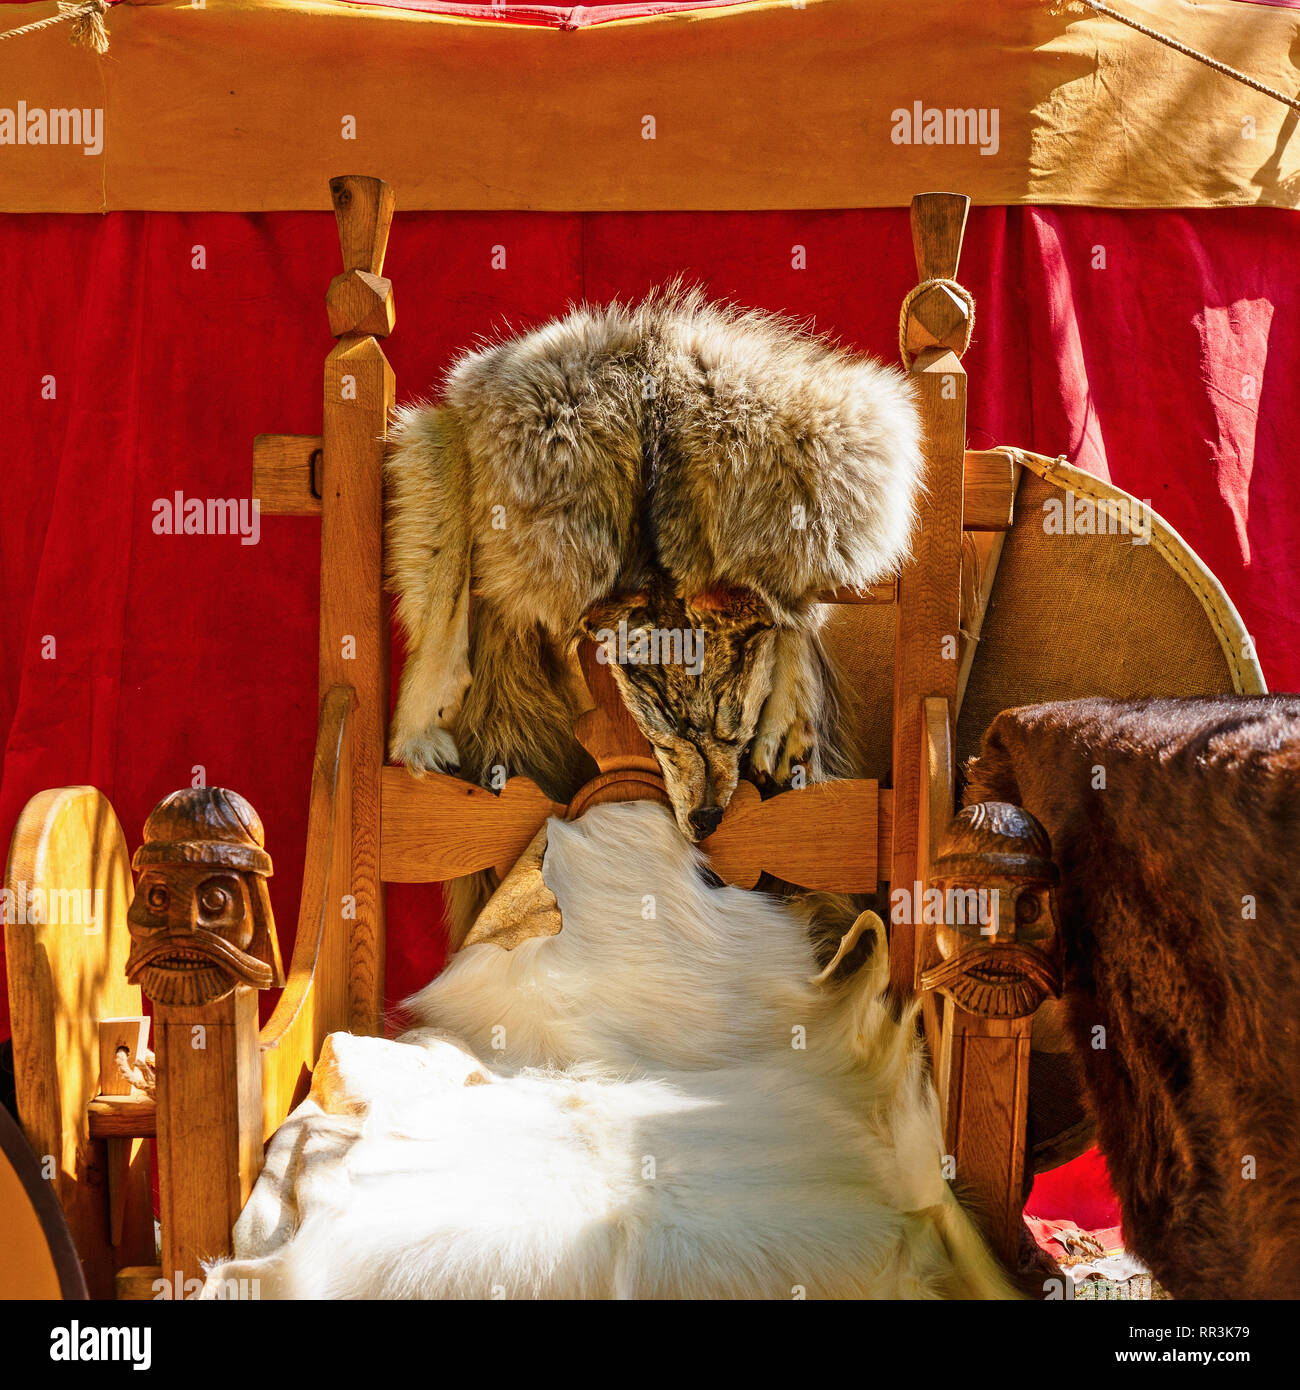 Barbarian, Norseman, Viking king or Koenig chair, seat or throne covered with a wolf, goat furs or skins stand in a sunny spot by the red pavilion Stock Photo